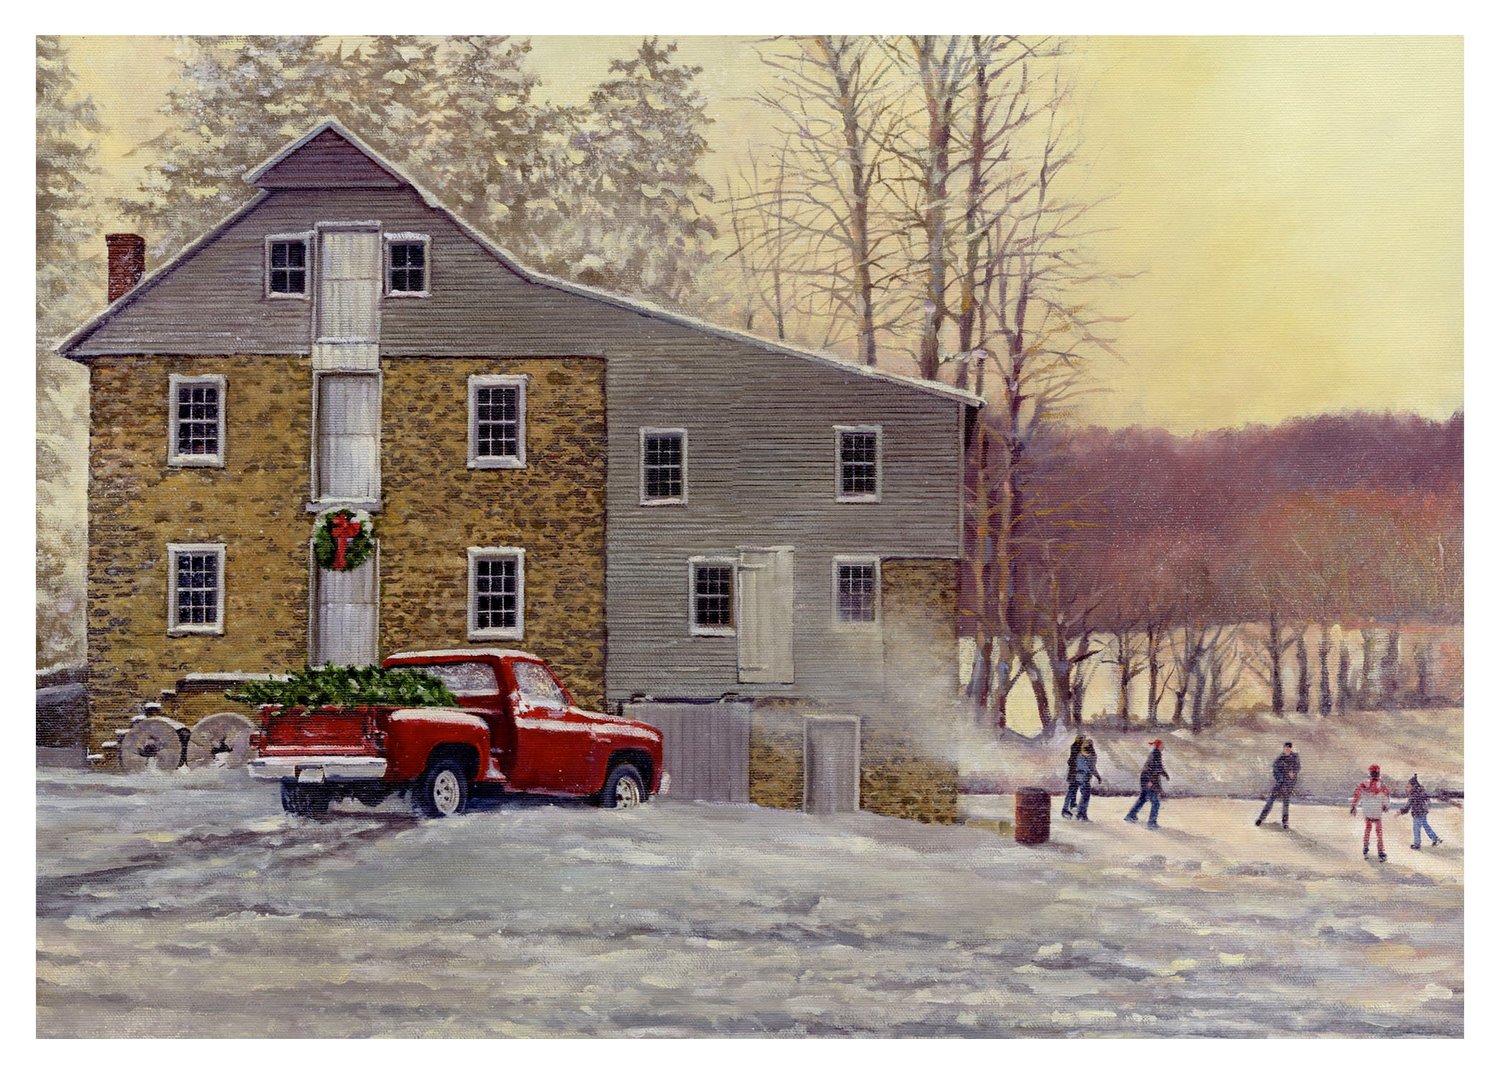 Sheard’s Mill, a painting by Jerry Cable and the subject of
his annual Christmas card.